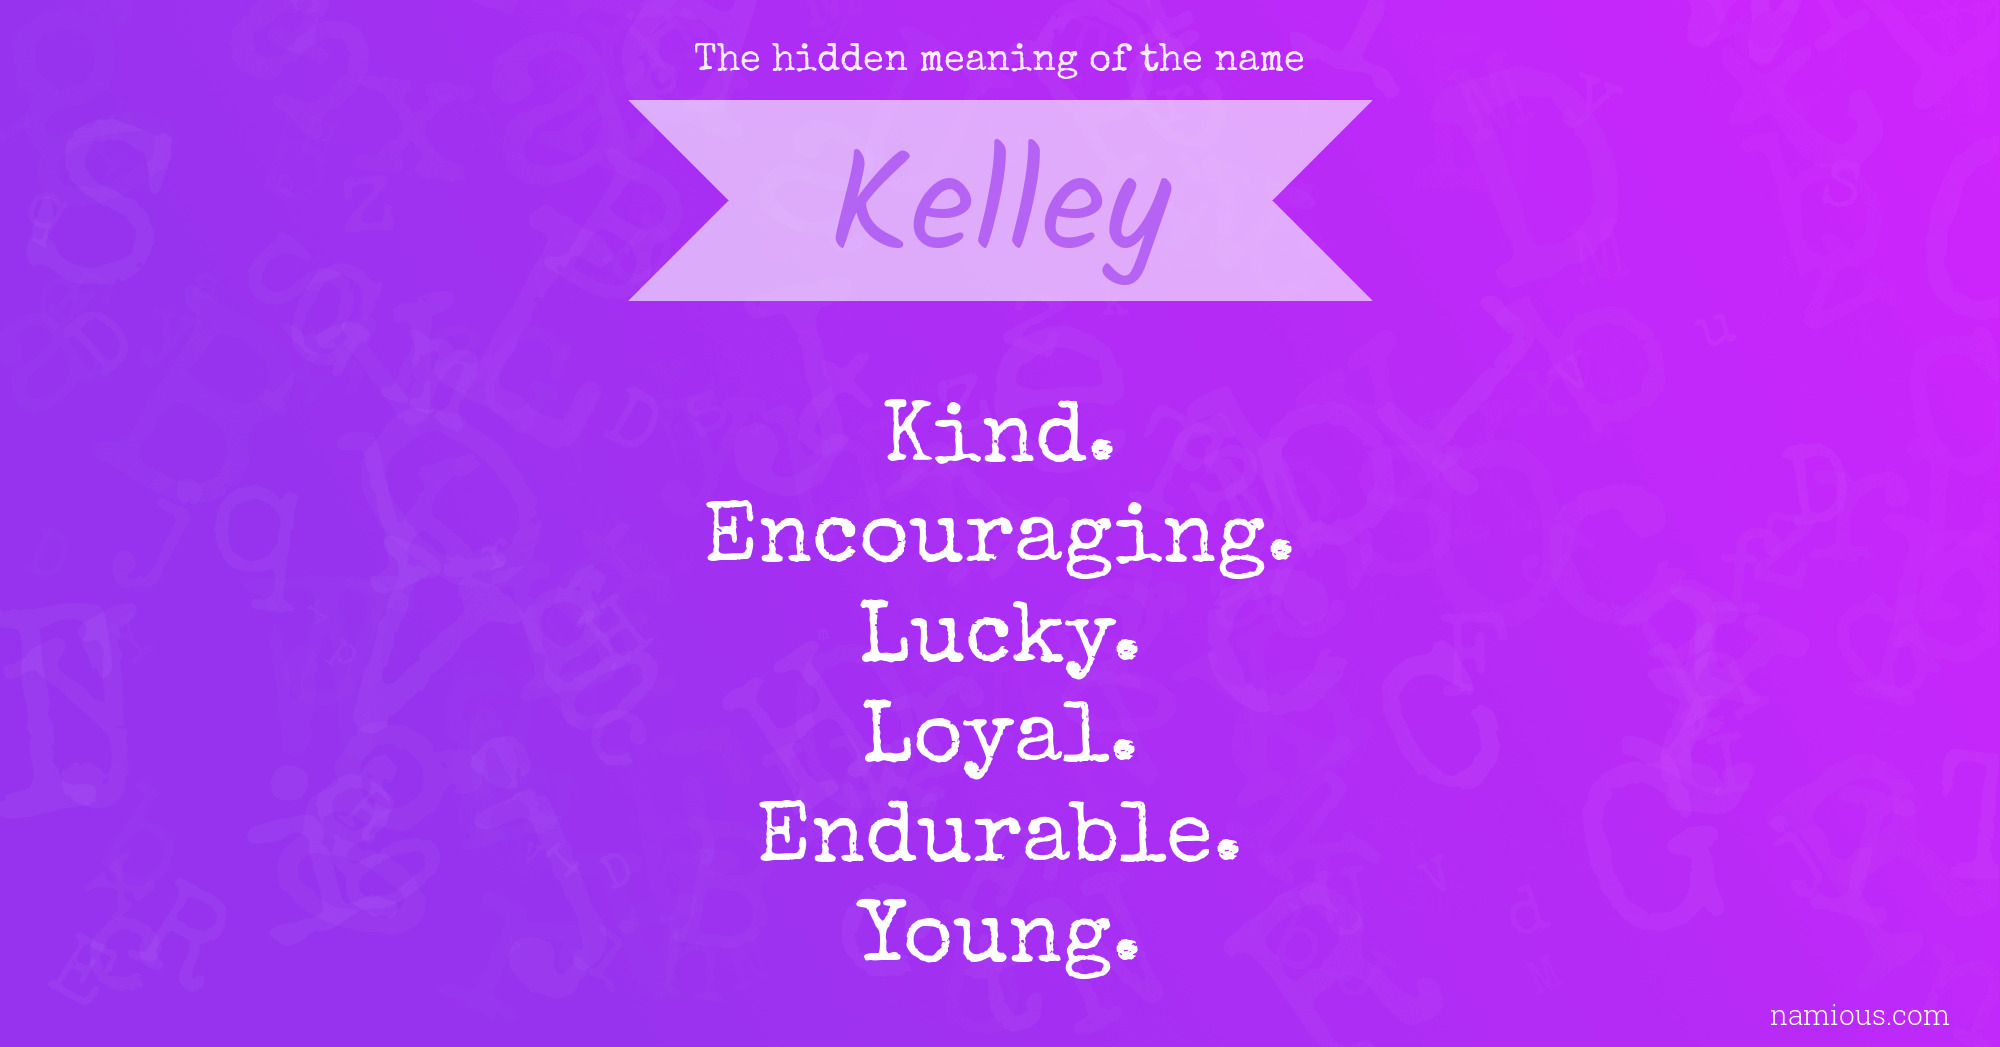 The hidden meaning of the name Kelley